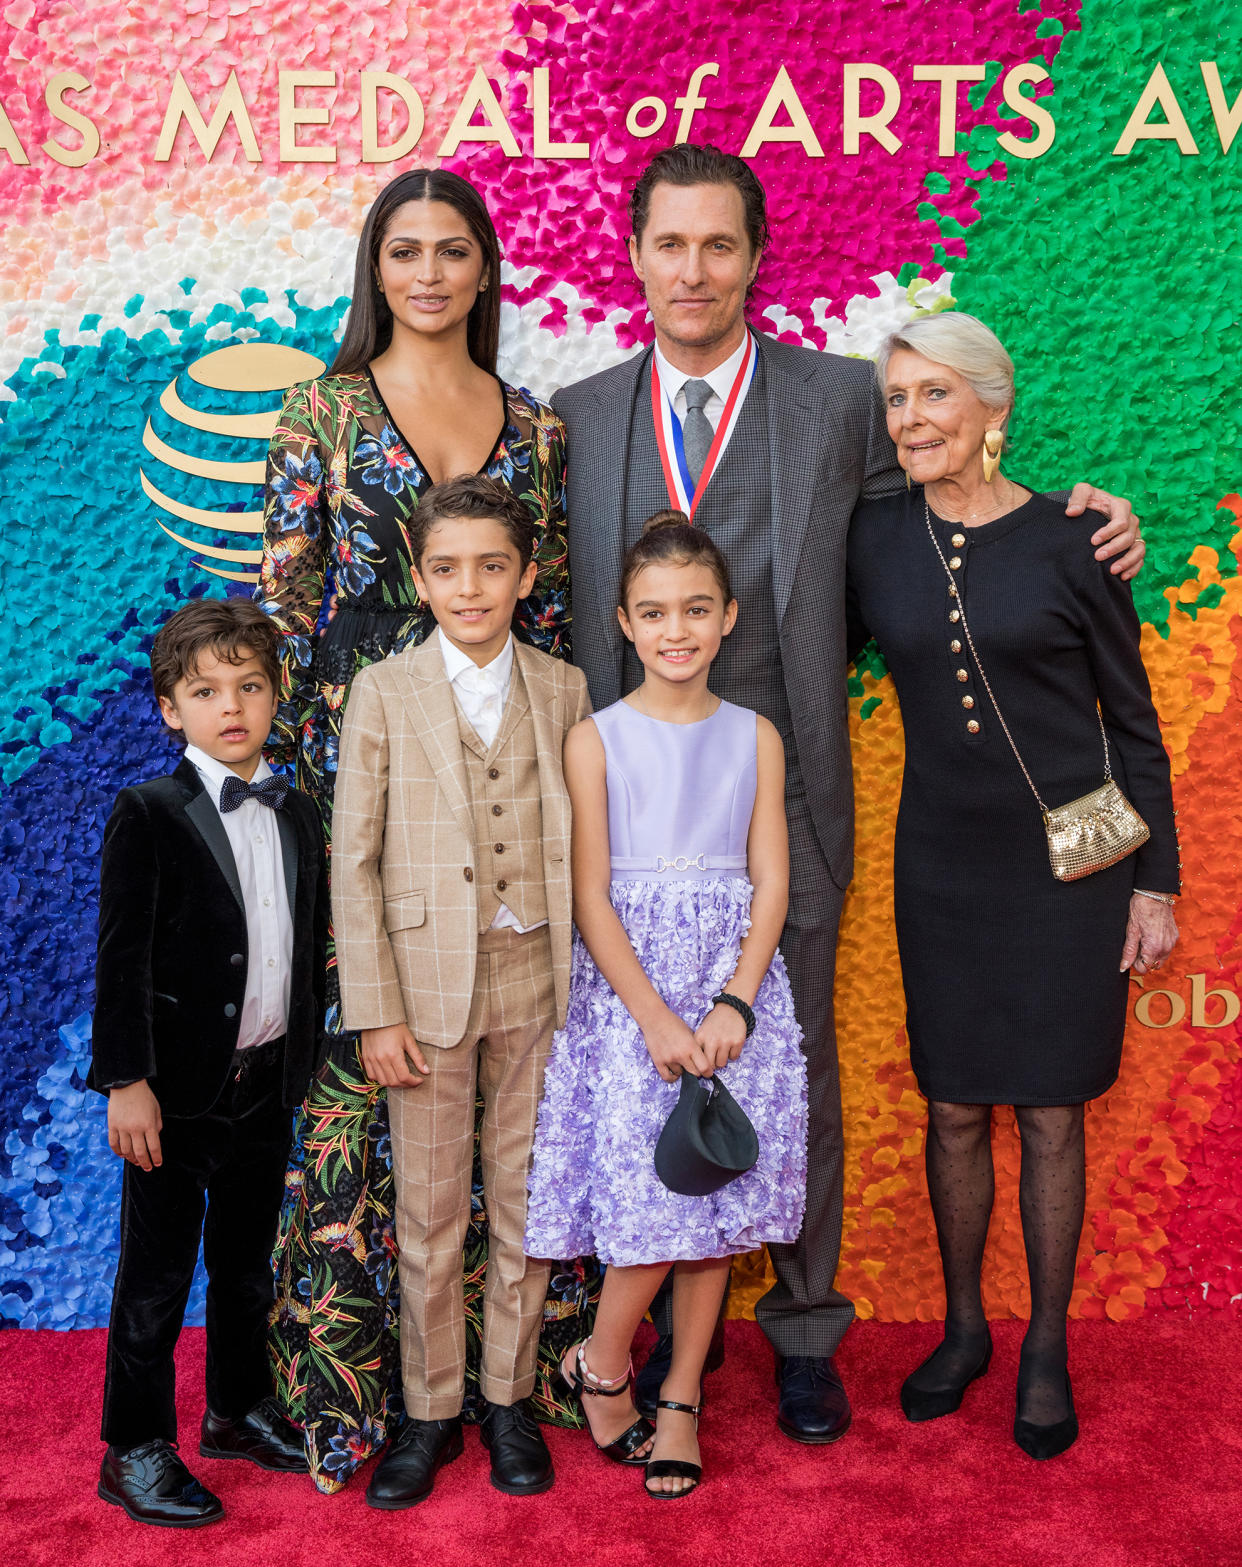 2019 Texas Medal of Arts - Arrivals (Rick Kern / WireImage)